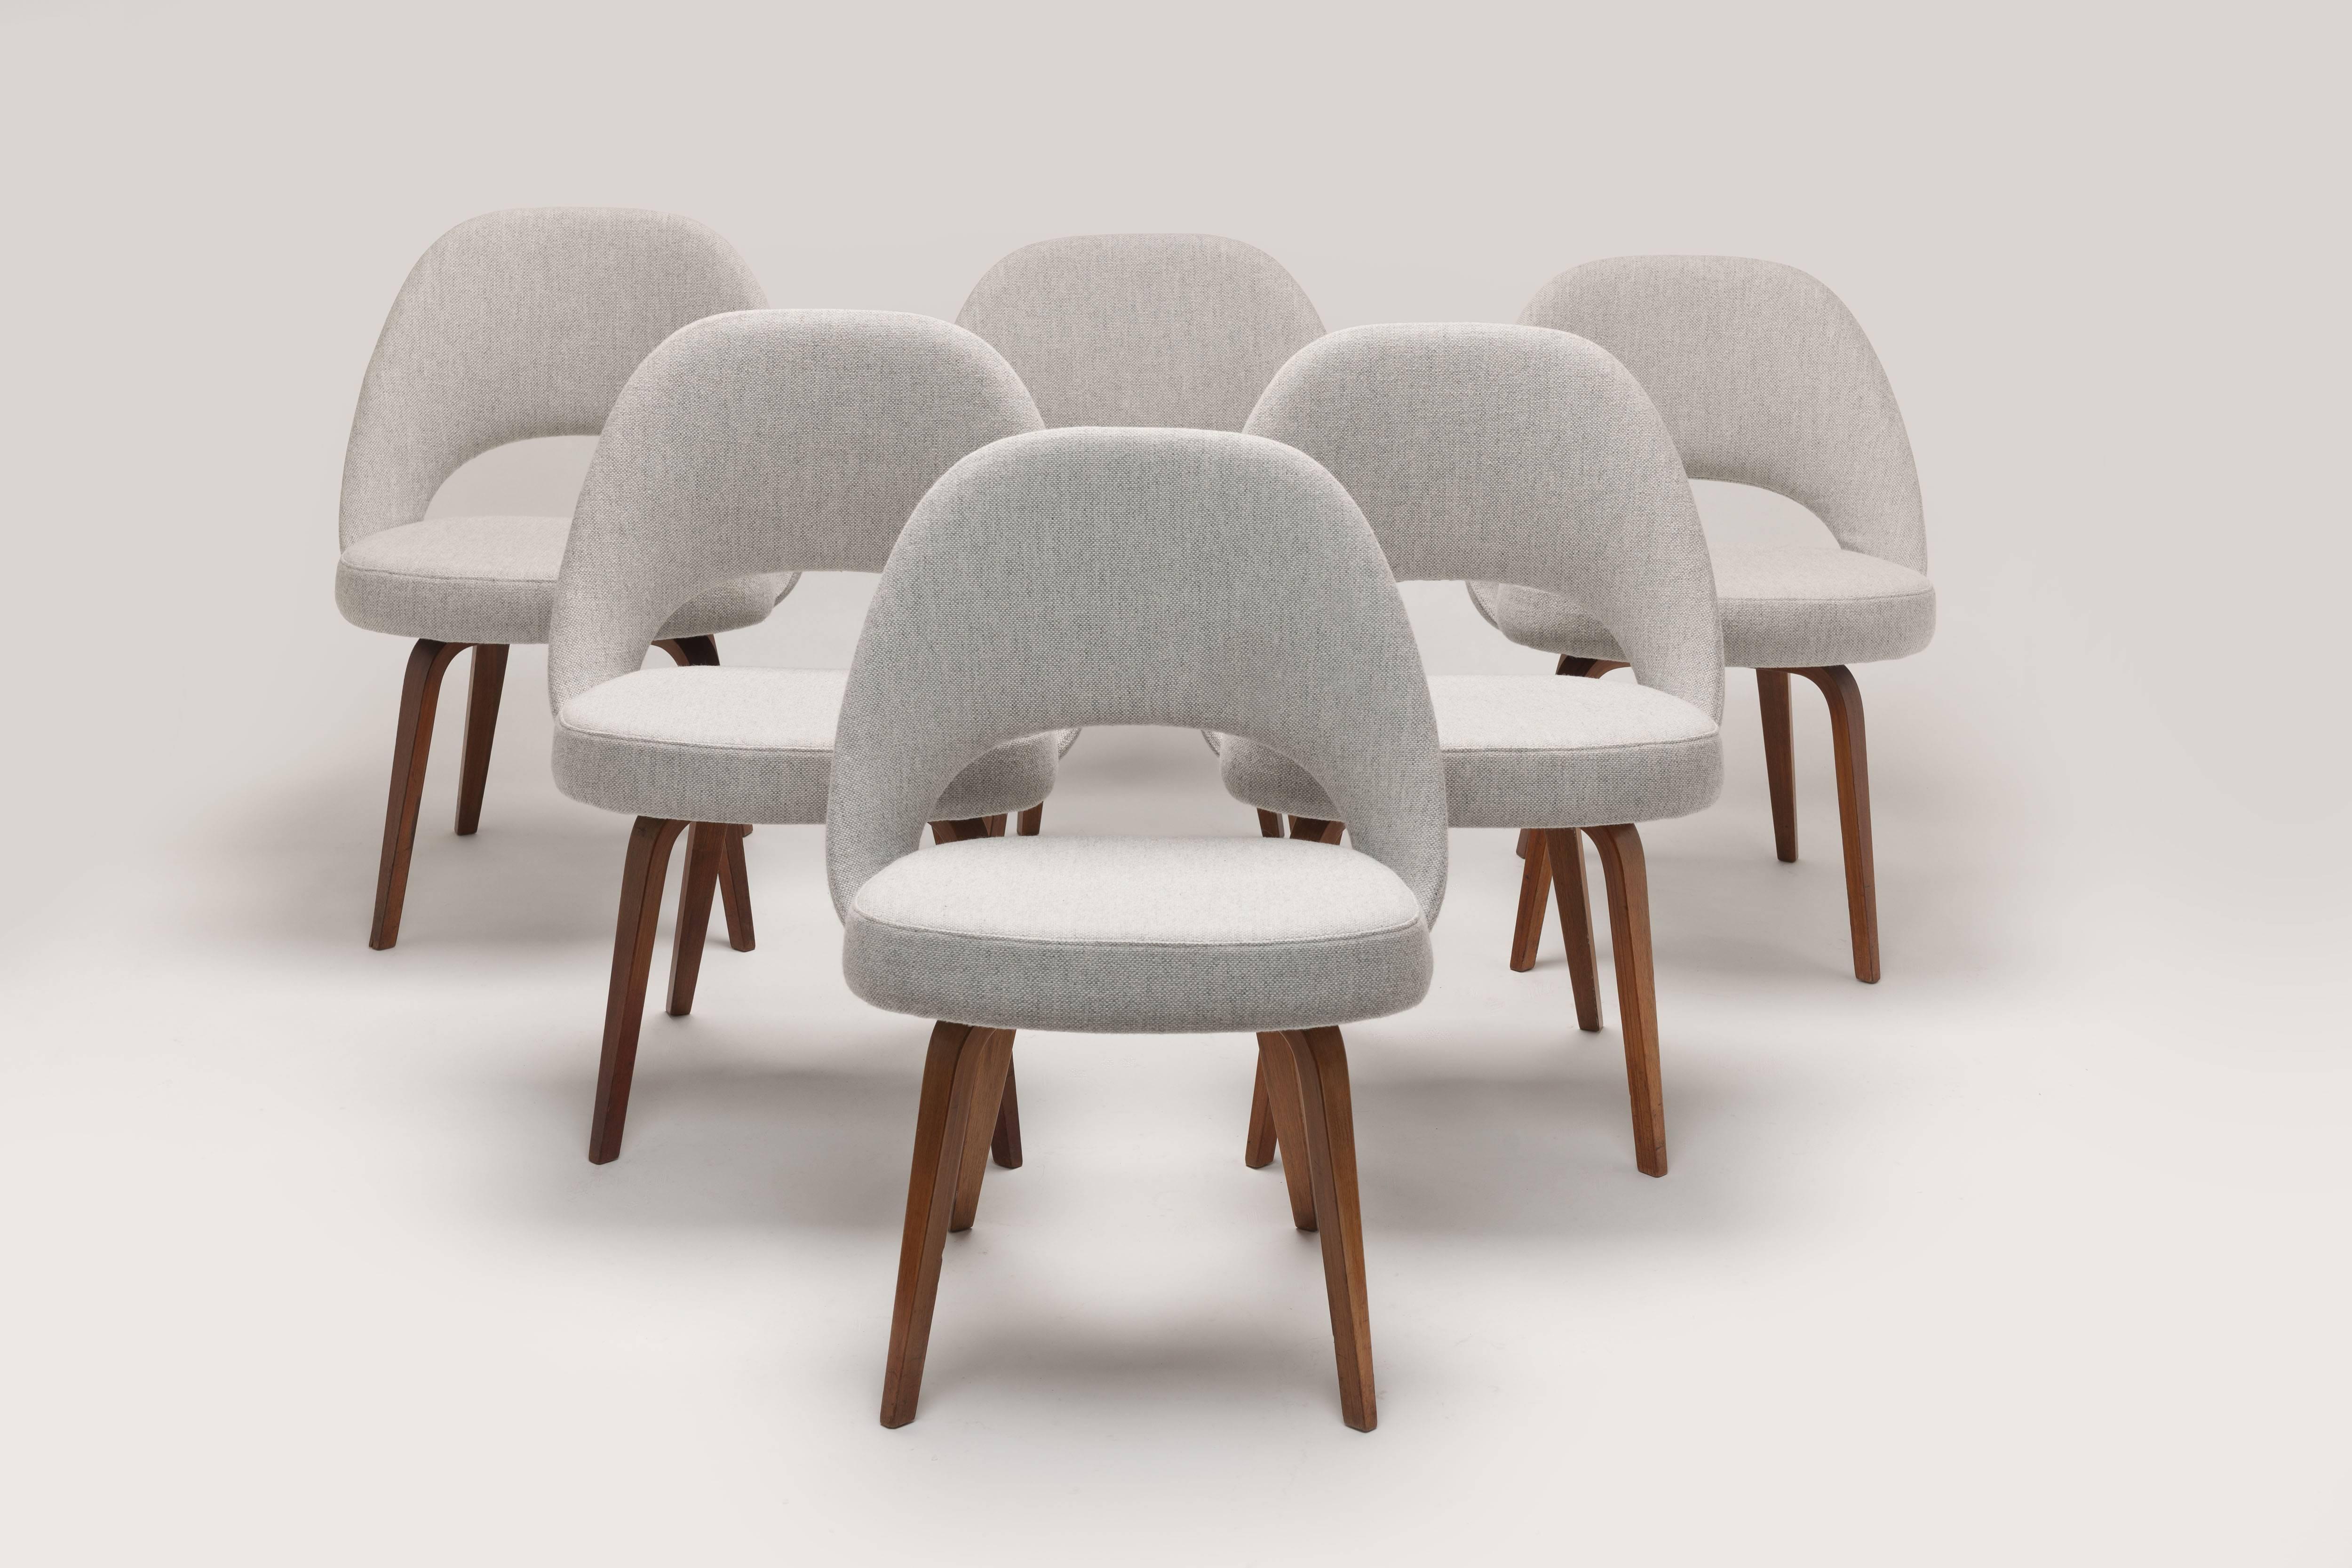 Saarinen executive chairs or model 71 with wooden legs in newer upholstery in Kvadrat 'Hallingdal' fabric. A beautiful, expensive and strong or durable fabric that is authentic to the design period.
Two out of six (6) chairs still carry the early